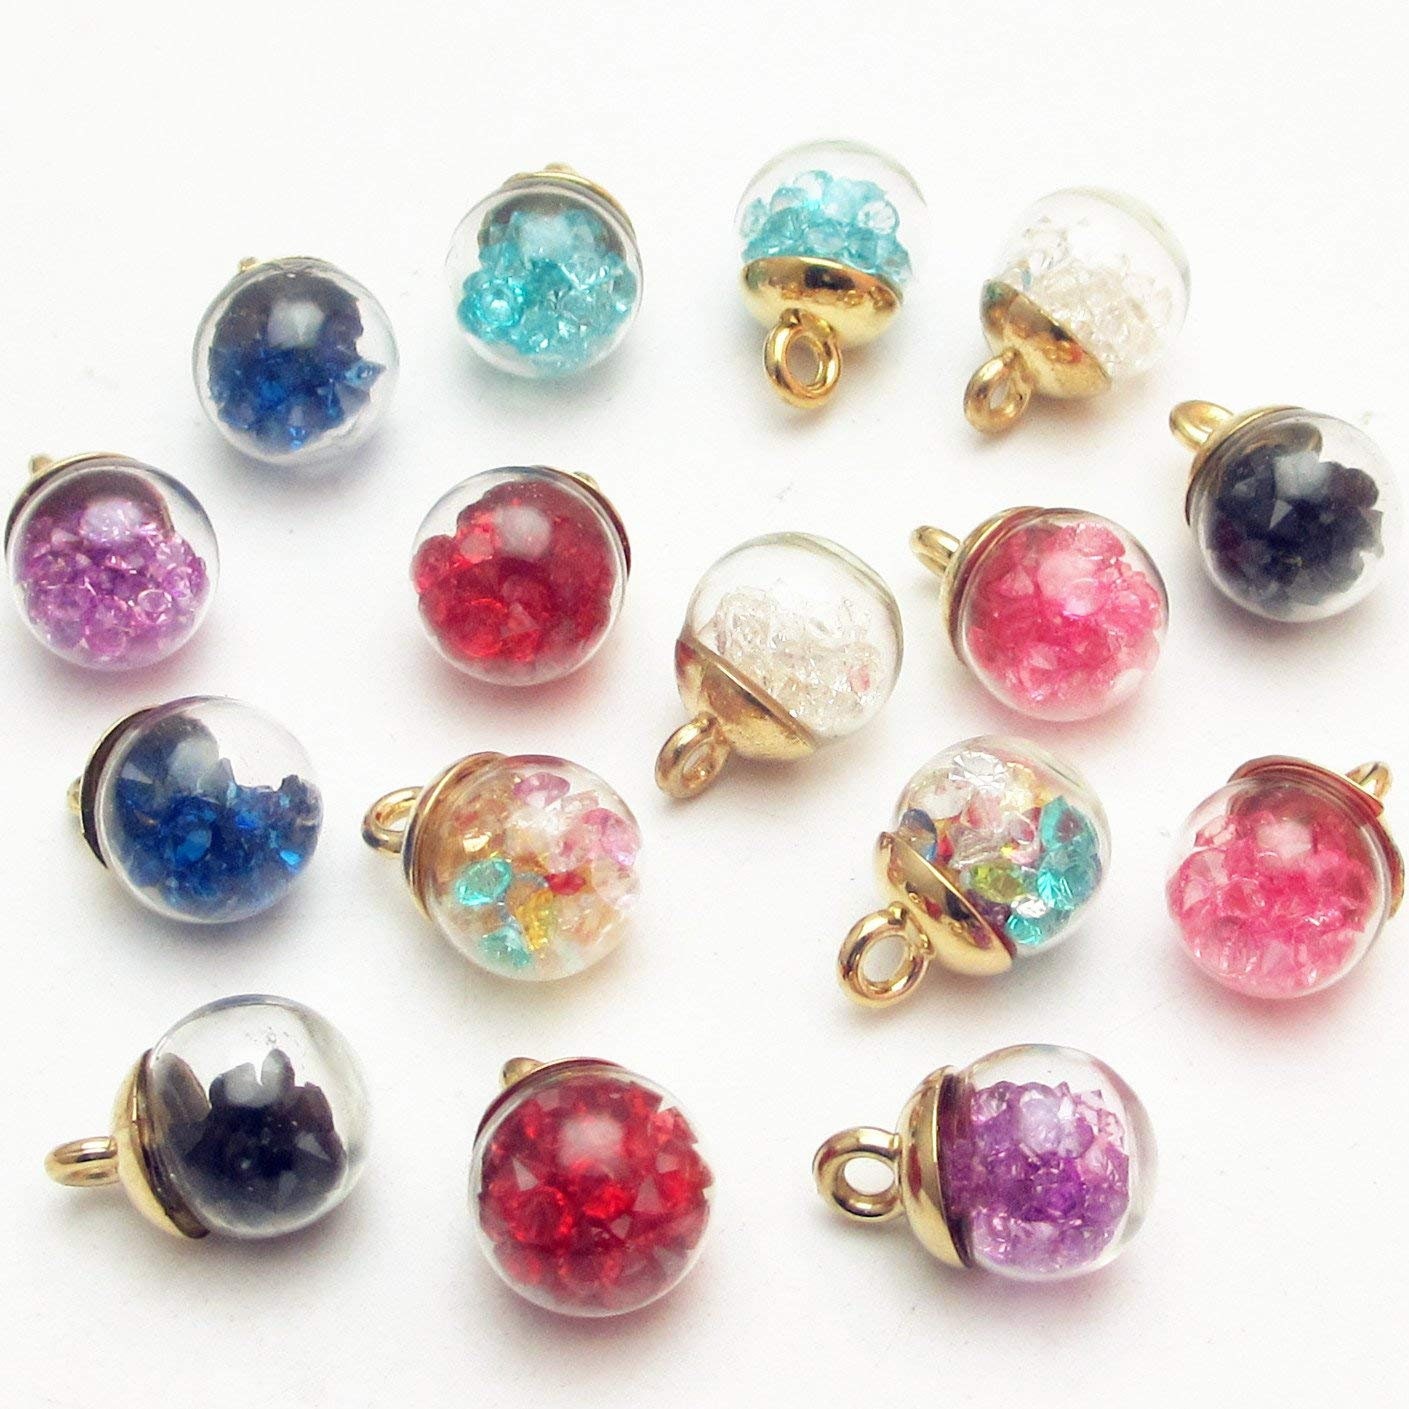 Buy Glass Ball Charms With Confetti Stars, Charms and Pendants, Gold Charms,  Charm Bracelets, Bracelet Making, 5 Charms per Pack Online in India 